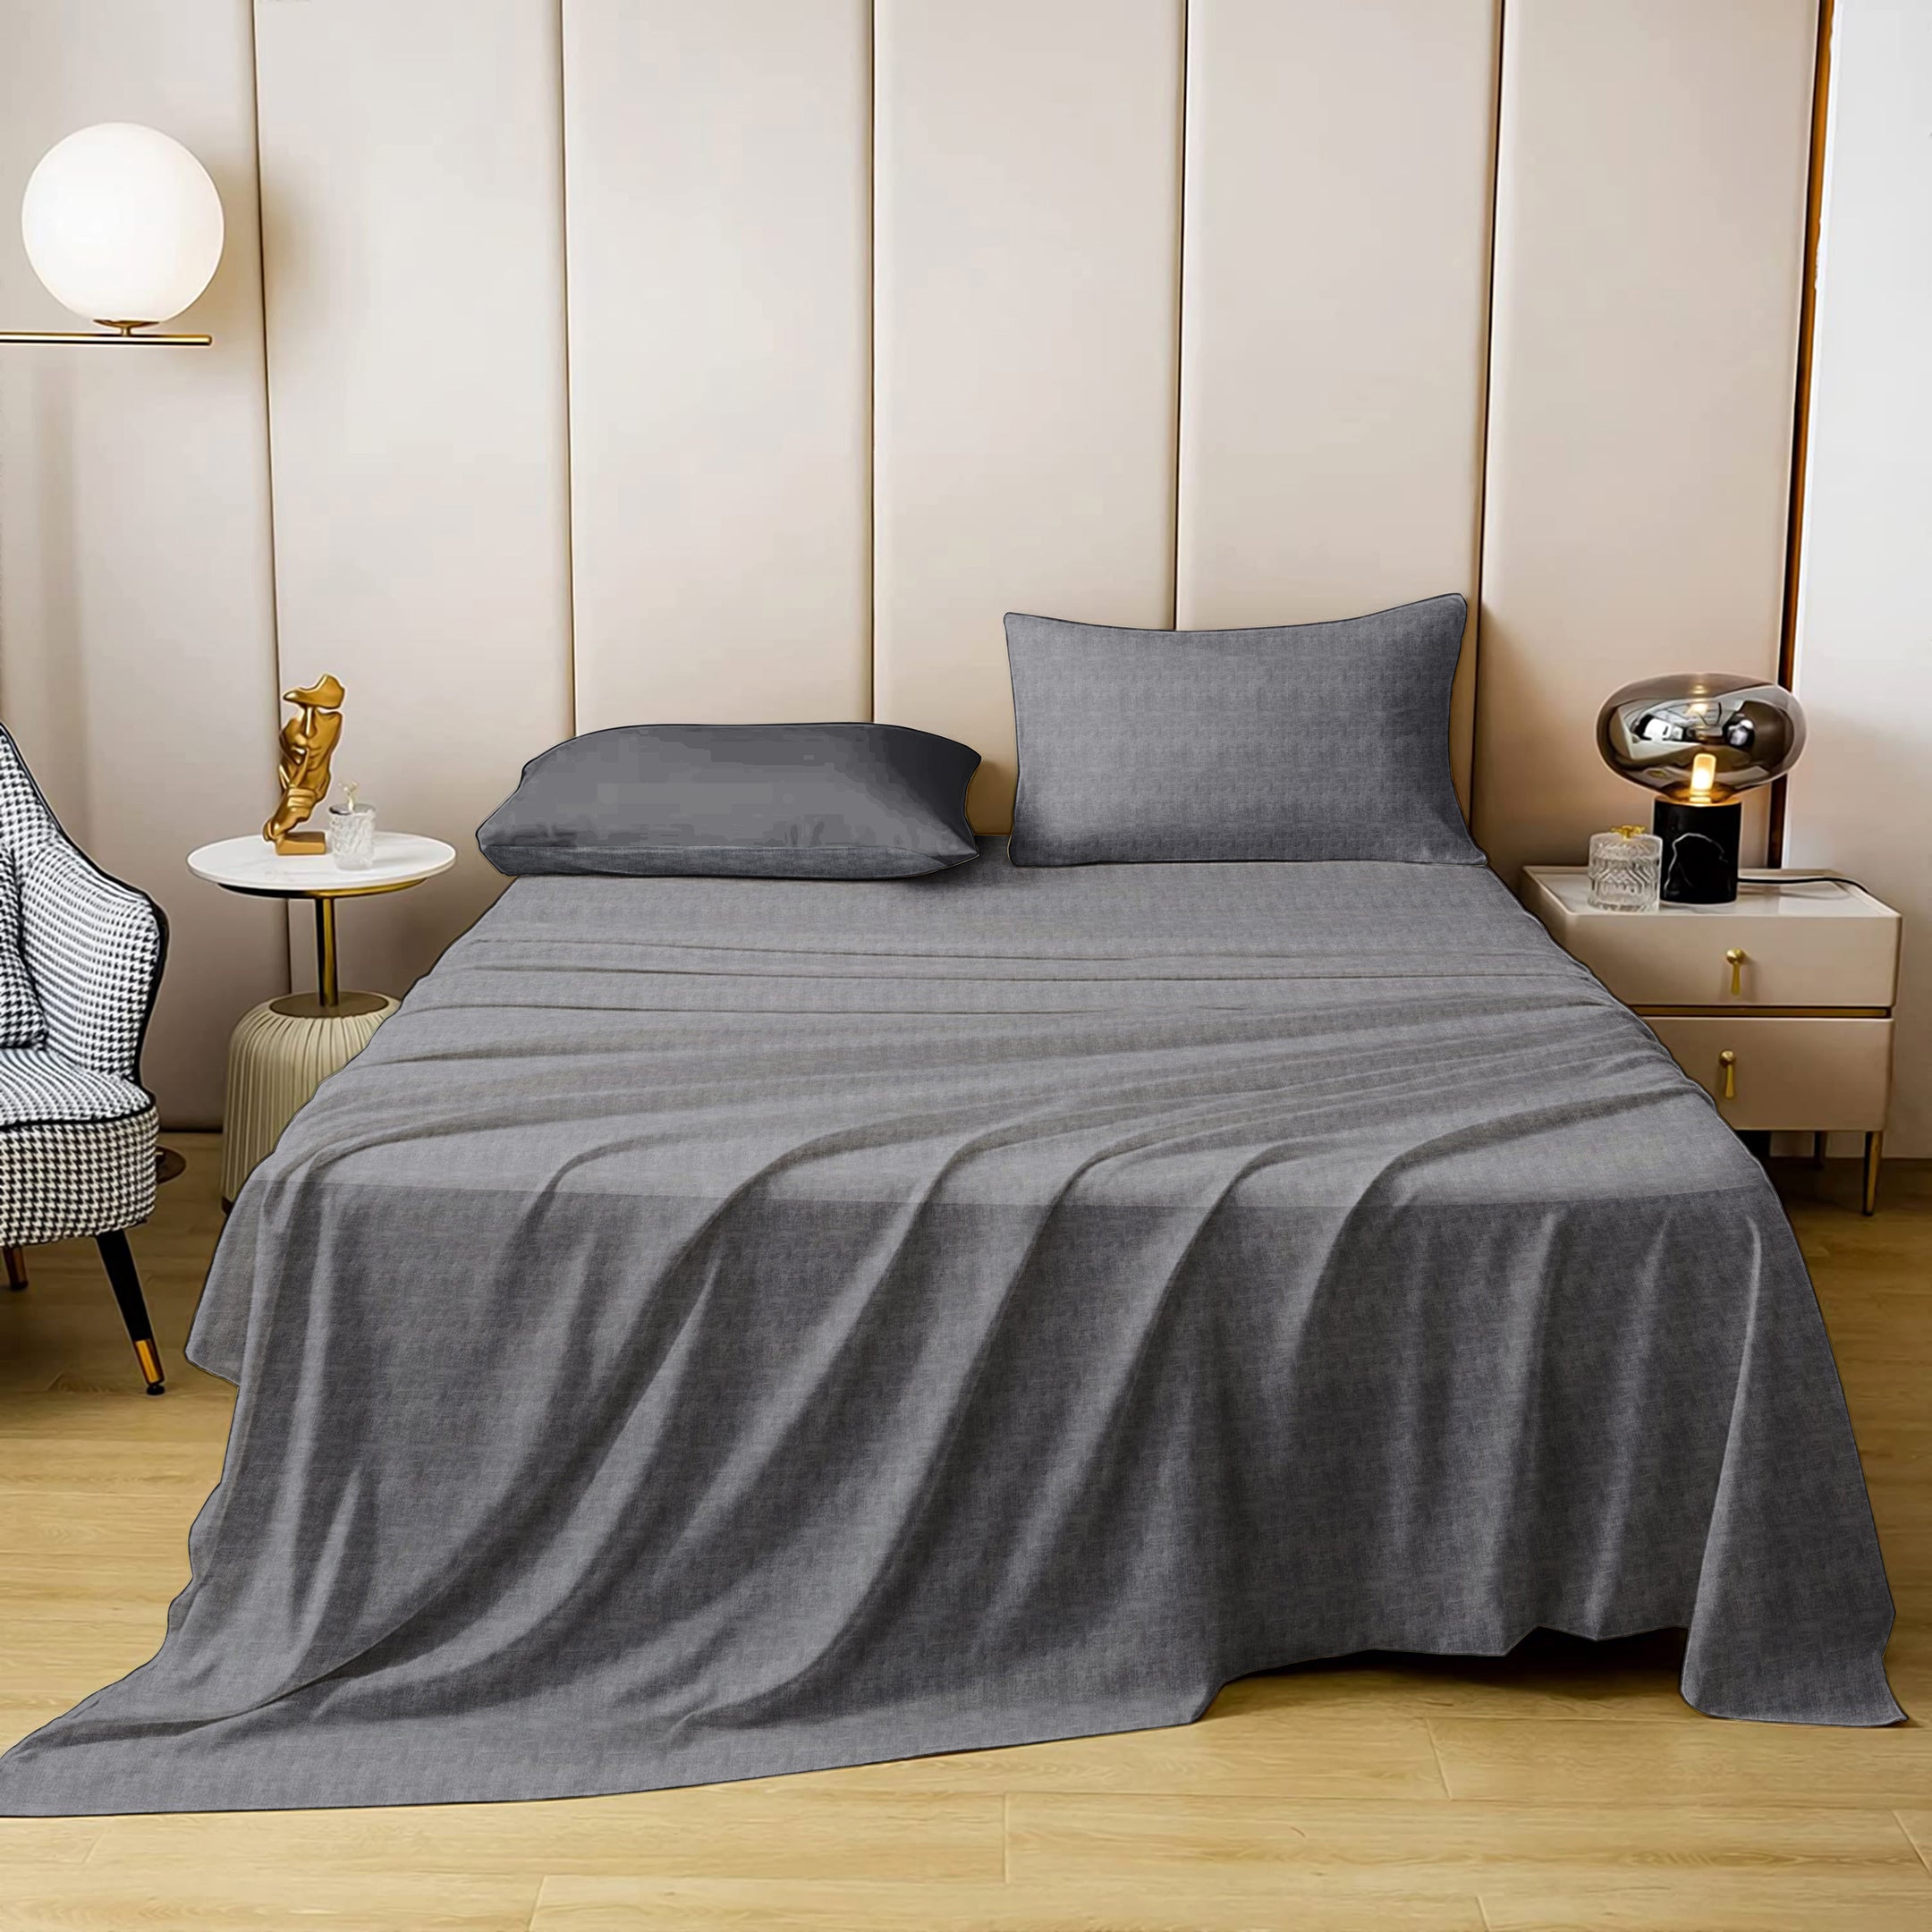 Jodhpur Texture Bedsheet for Double Bed with 2 PillowCovers King Size (104" X 90") Gray